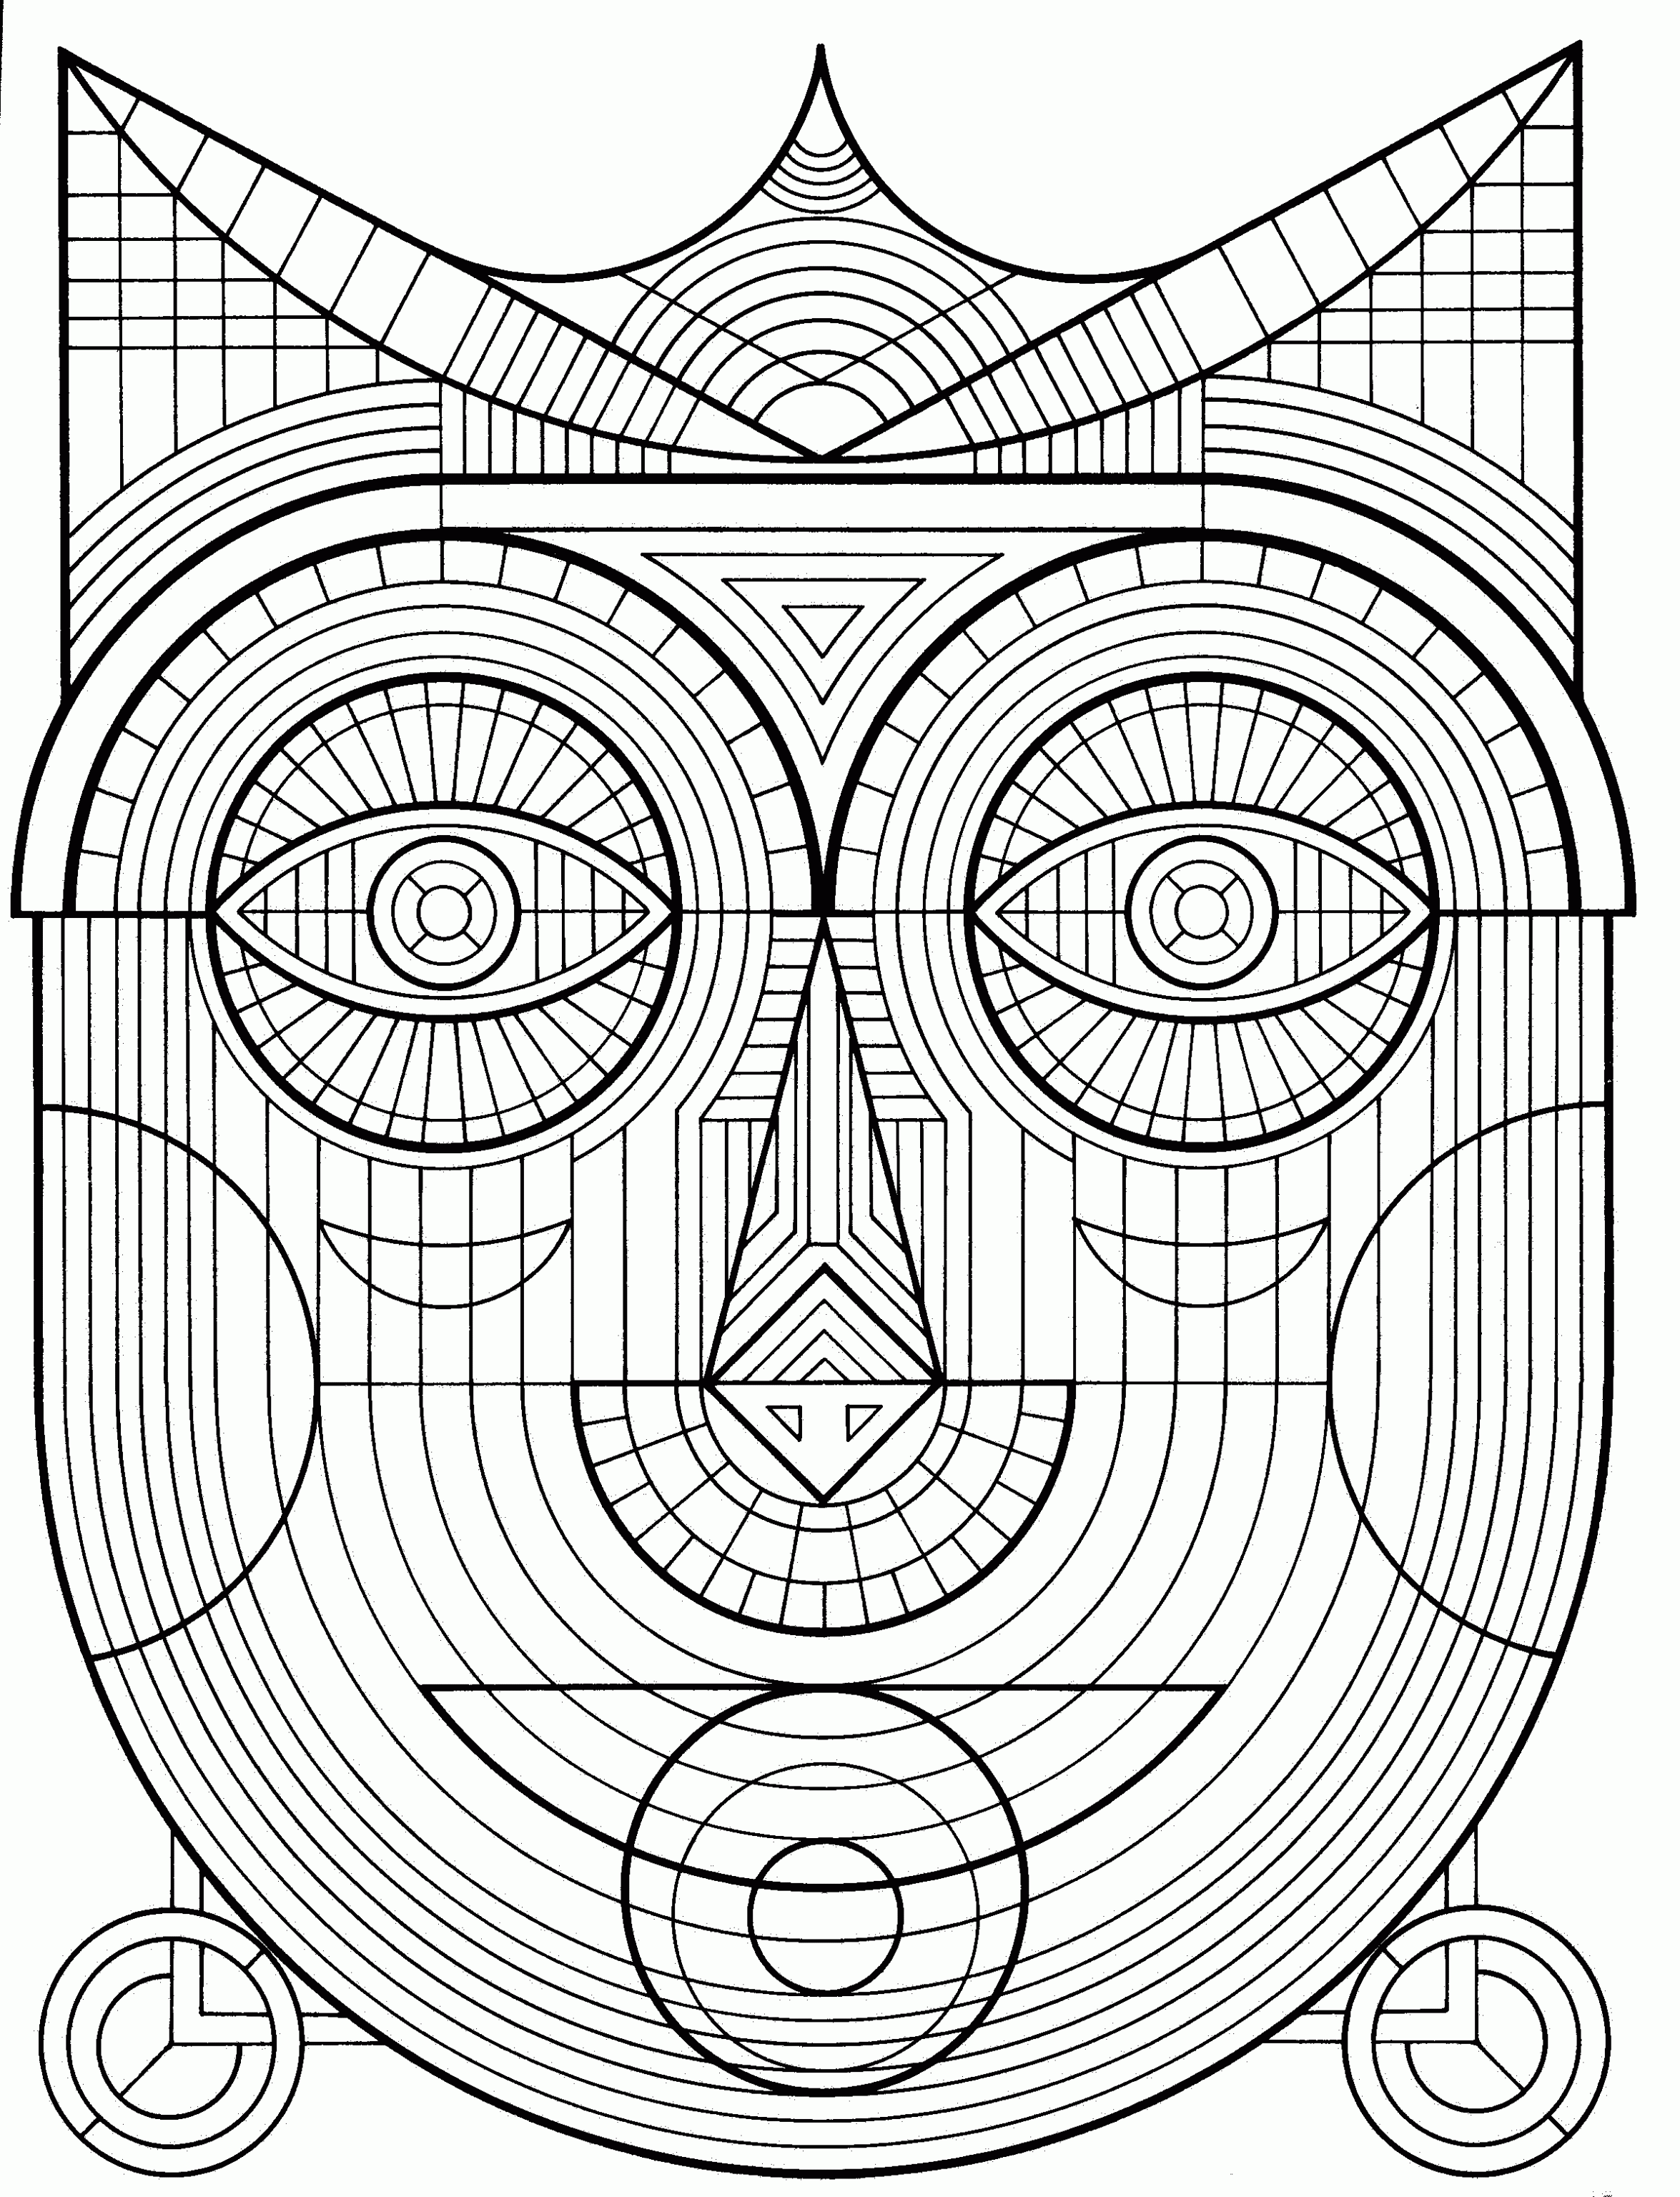 Funny free Adult coloring page to print and color